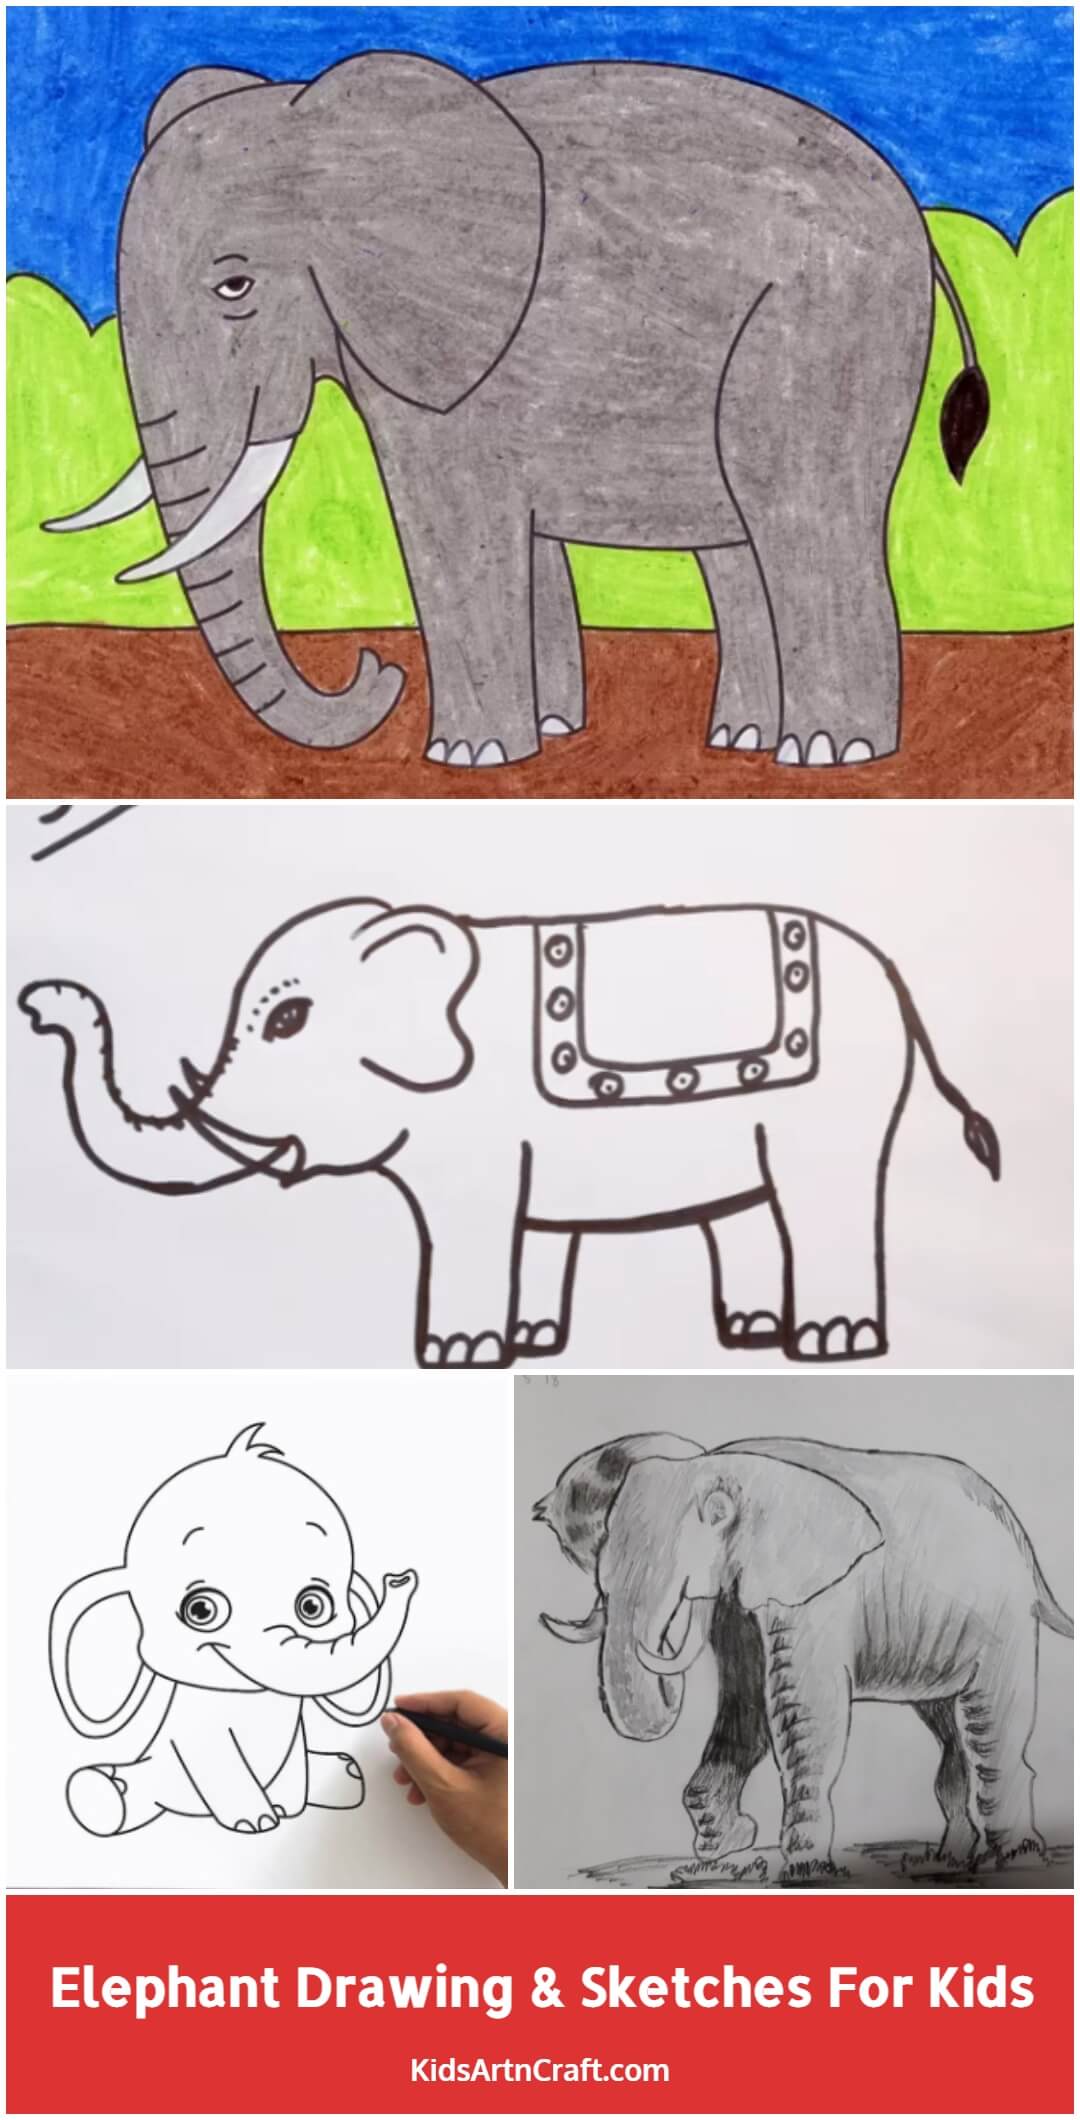 Elephant Drawing & Sketches for Kids